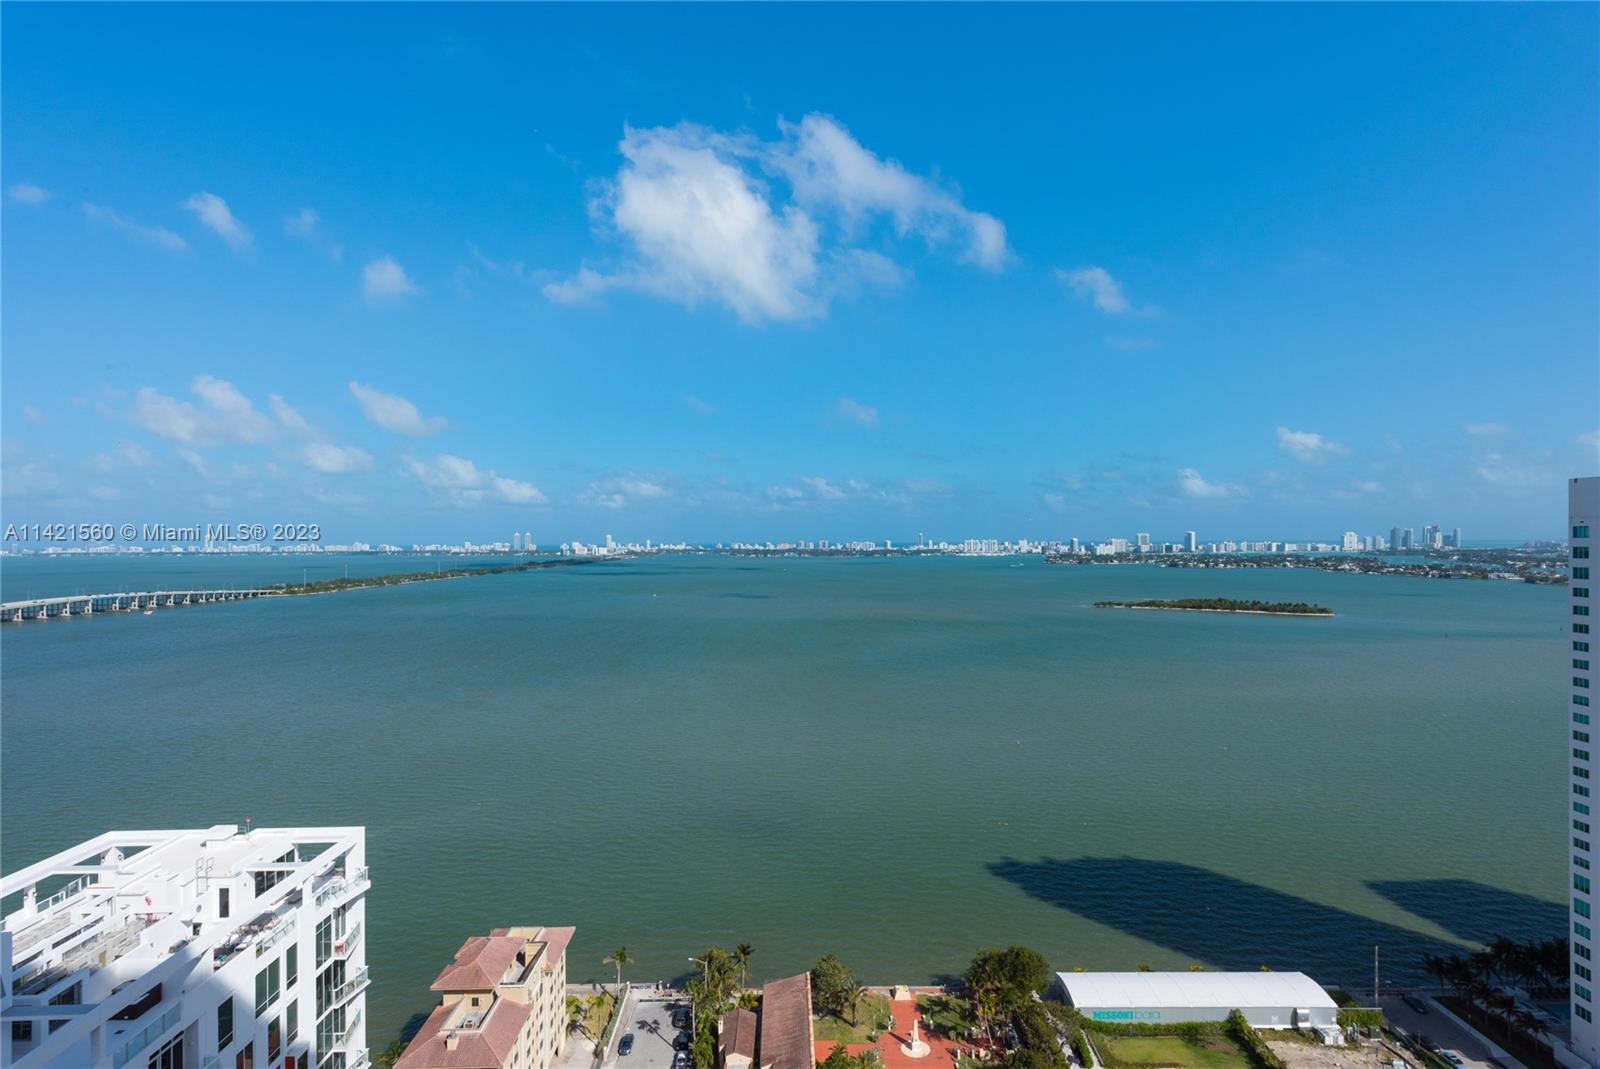 Spacious  3 bedrooms and 3 baths Residence located in Edgewater Miami completed in 2015. Only 5 Unit